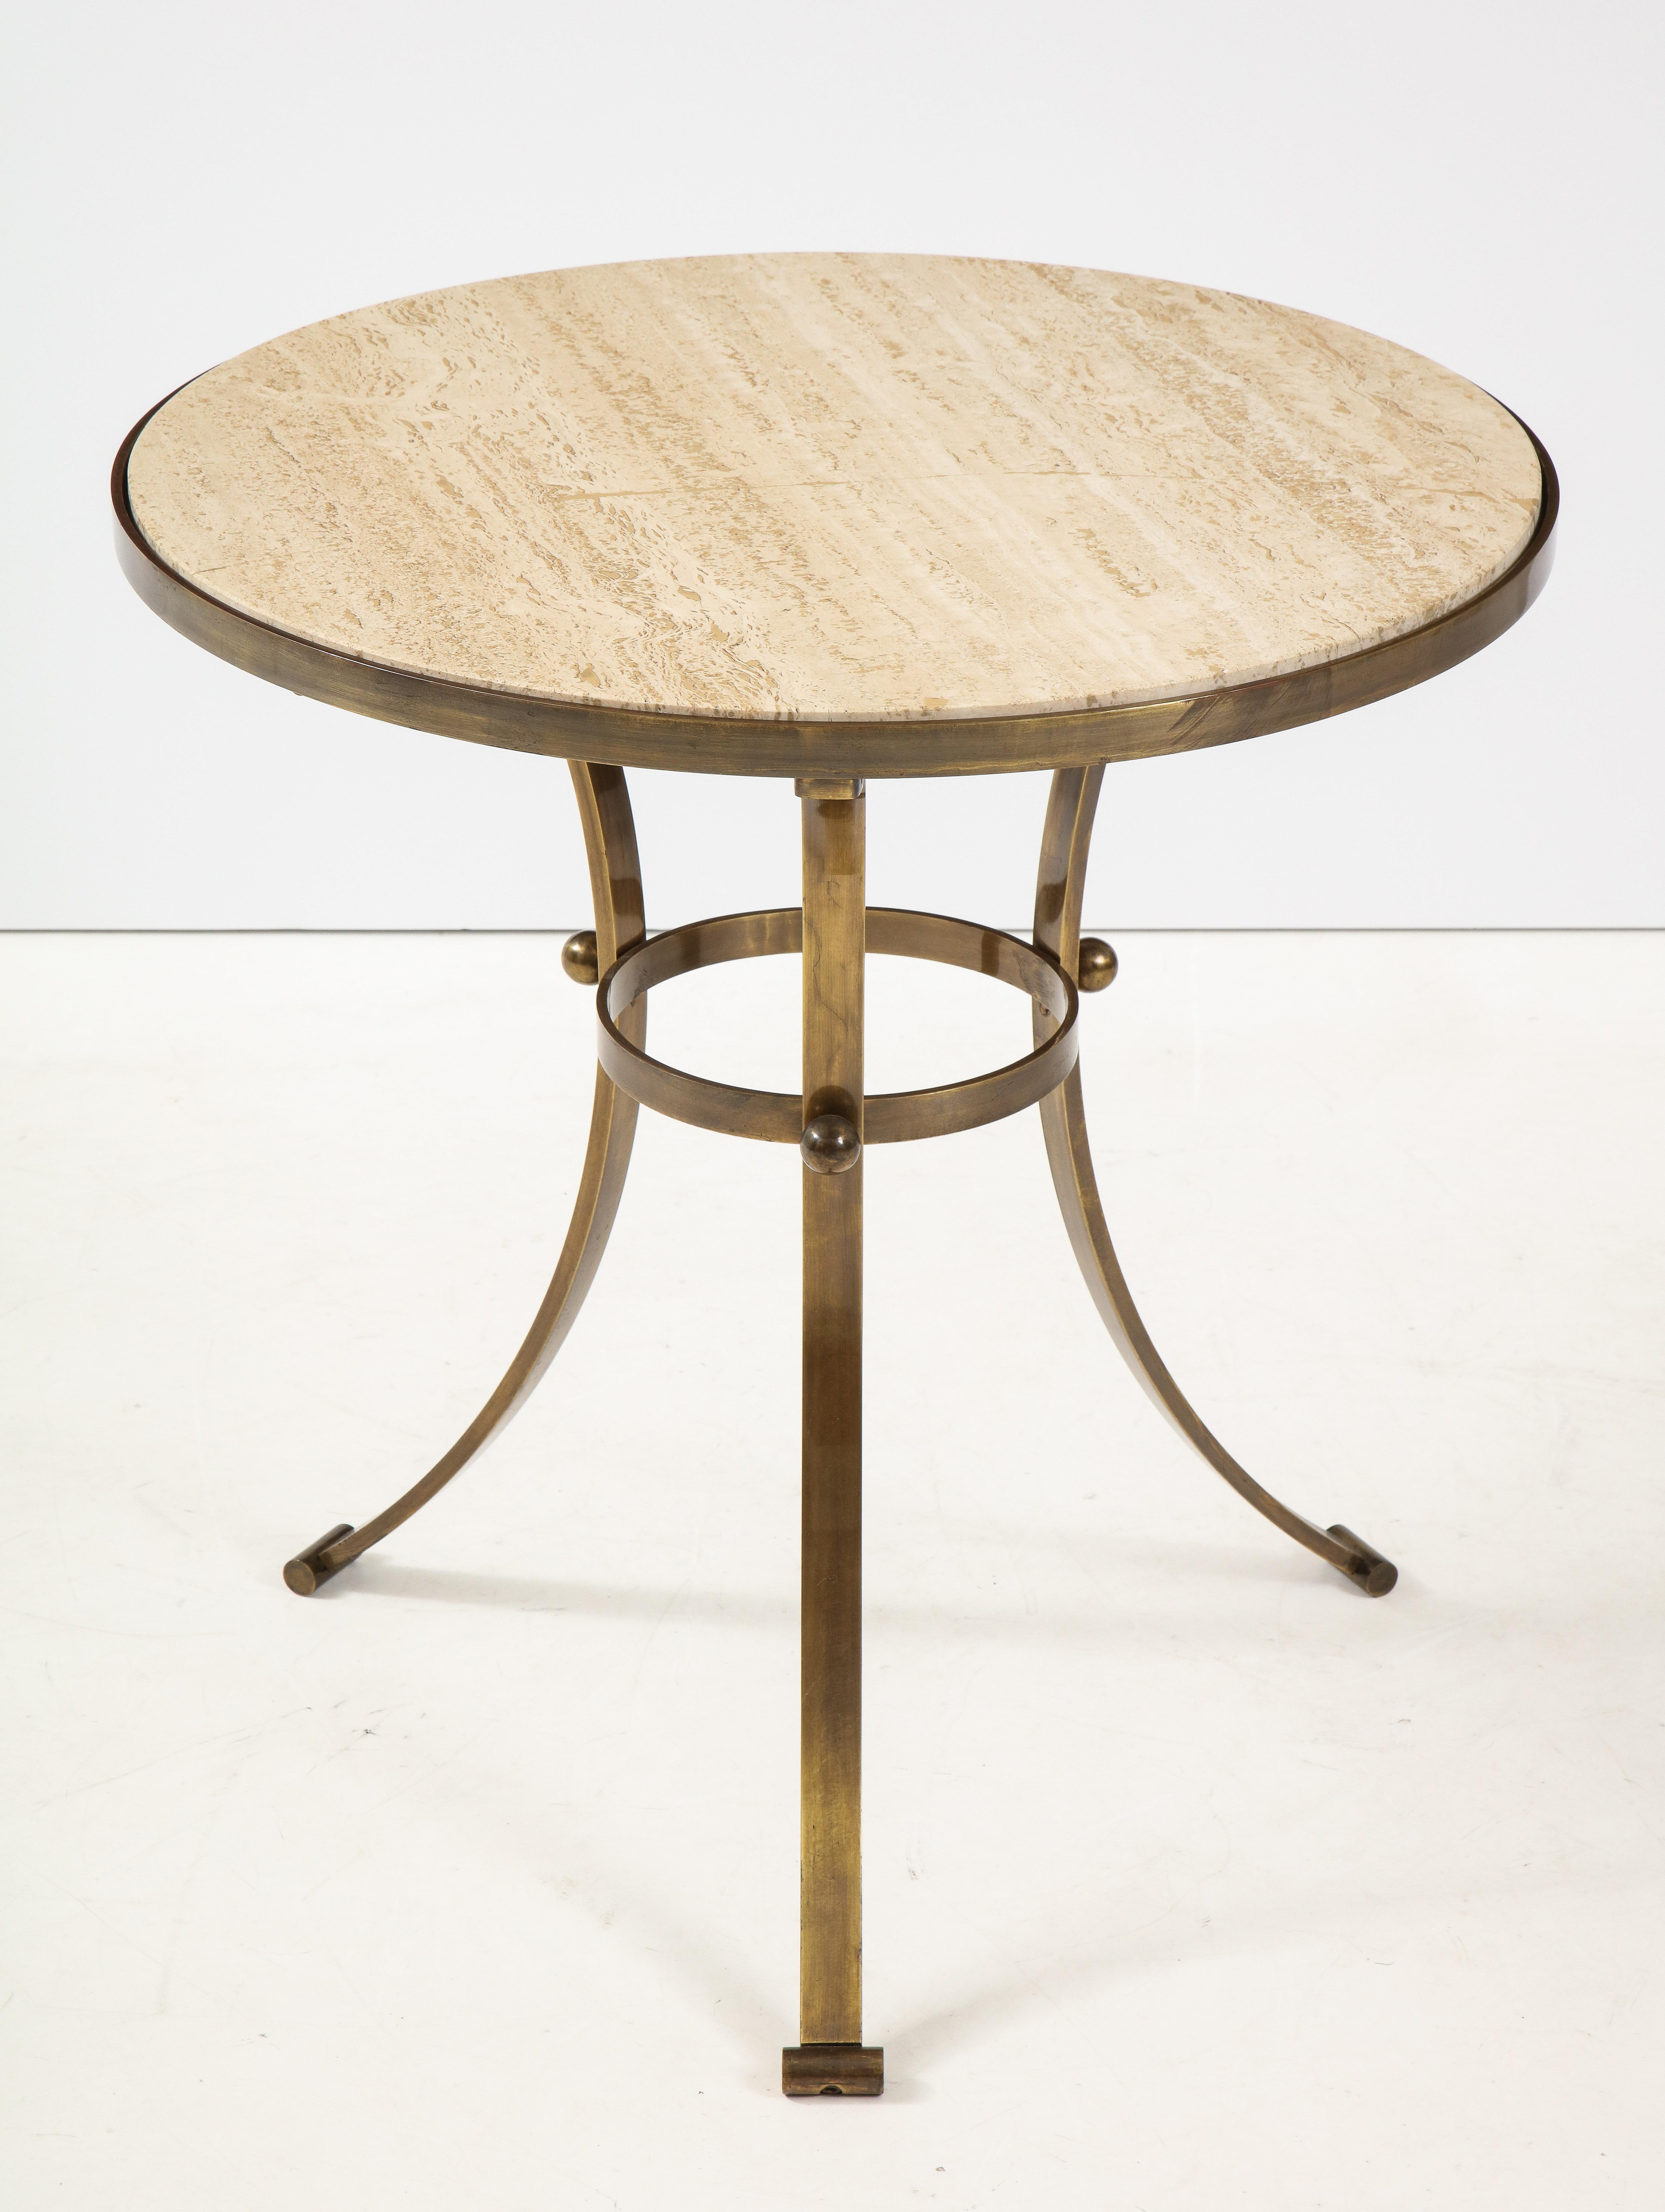 Stunning 1960s bronze with travertine top tripod large side table/Game table from Spain.